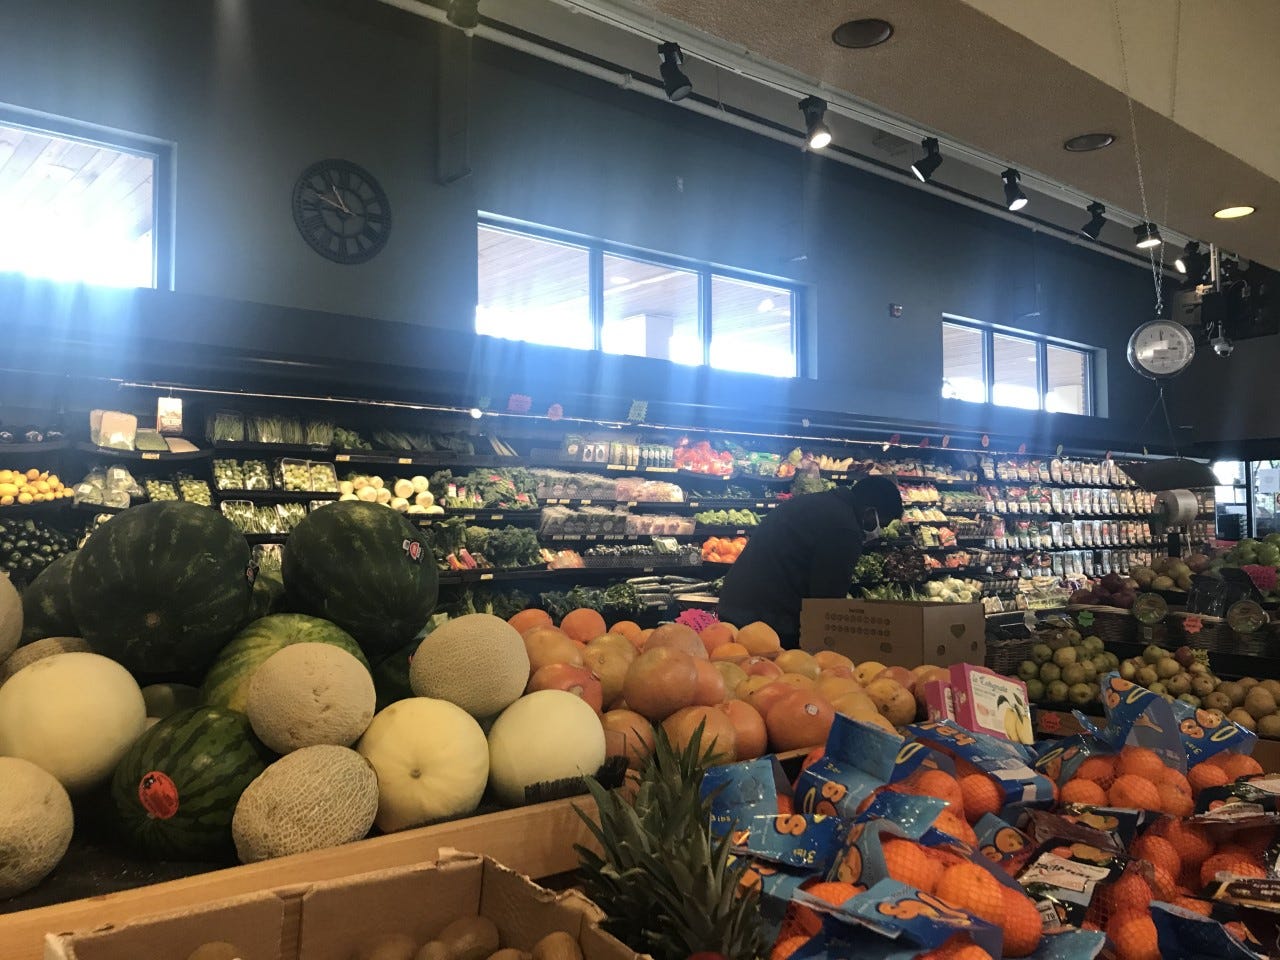 As Joe Biden prepared to take the oath of office, Janssen’s market in Greenville was in the middle of a normal day. The televisions in the cafe weren’t showing the inauguration, but instead were tuned to the Food Network and an ultimate fighting match.